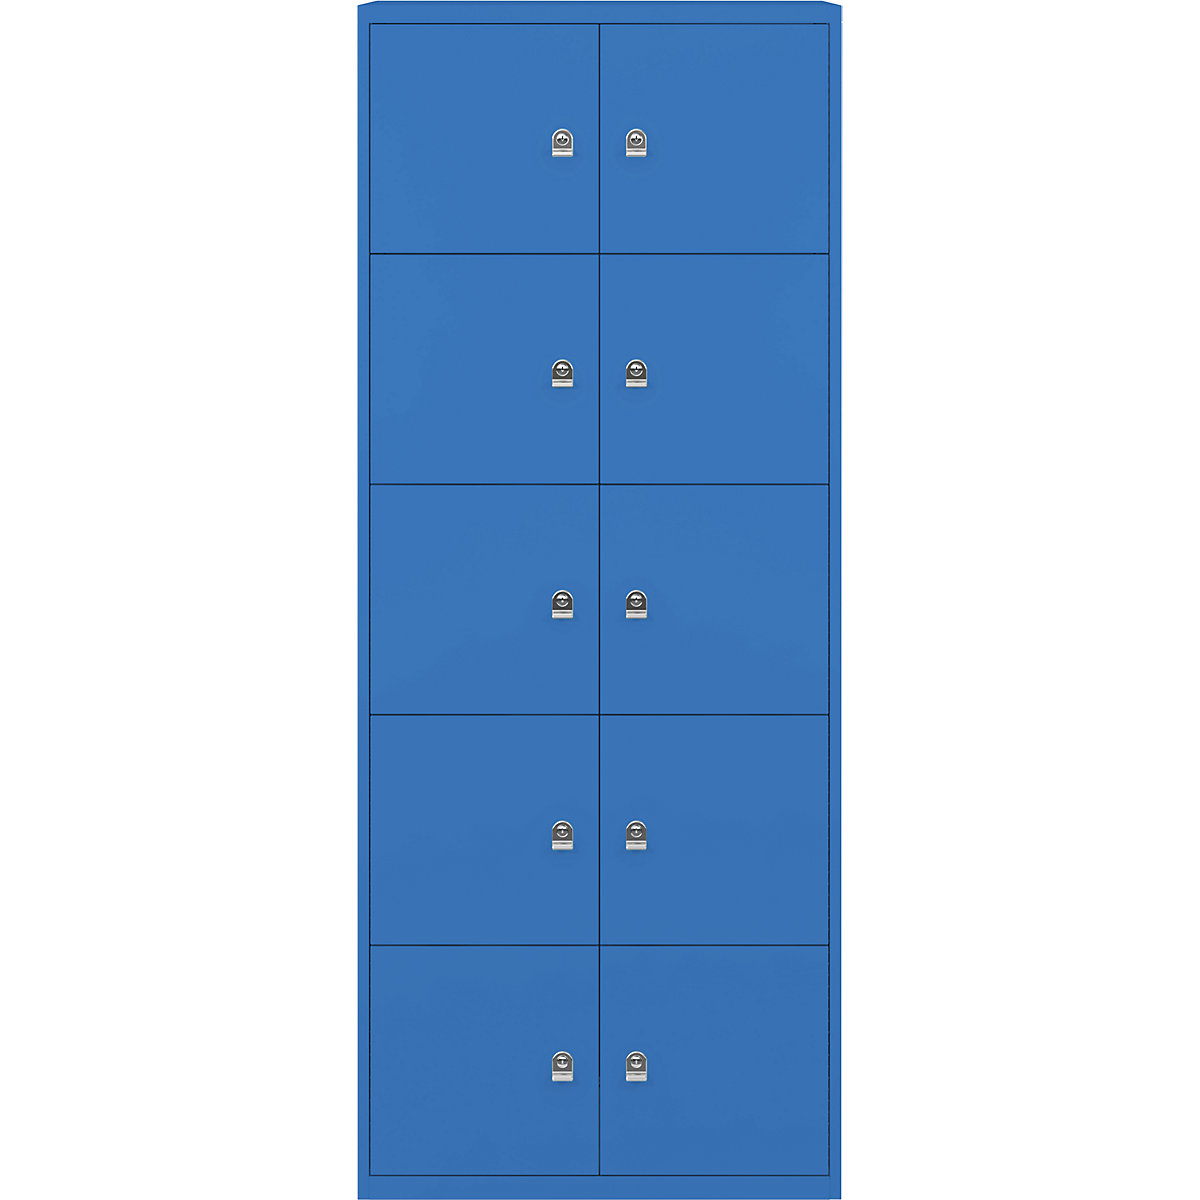 LateralFile™ lodge – BISLEY, with 10 lockable compartments, height 375 mm each, blue